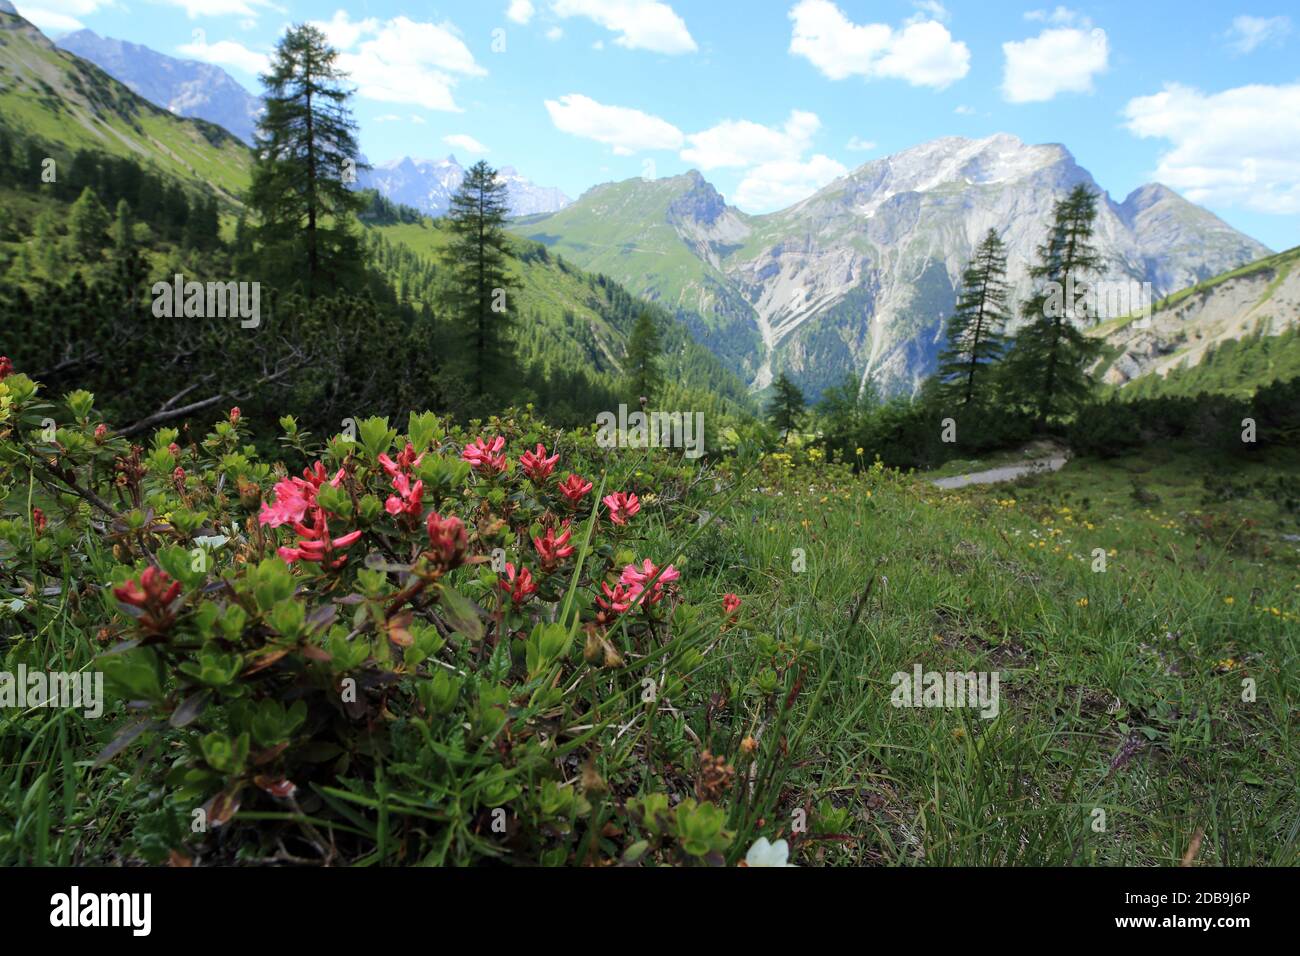 some alp roses in front of a mountain landscape Stock Photo